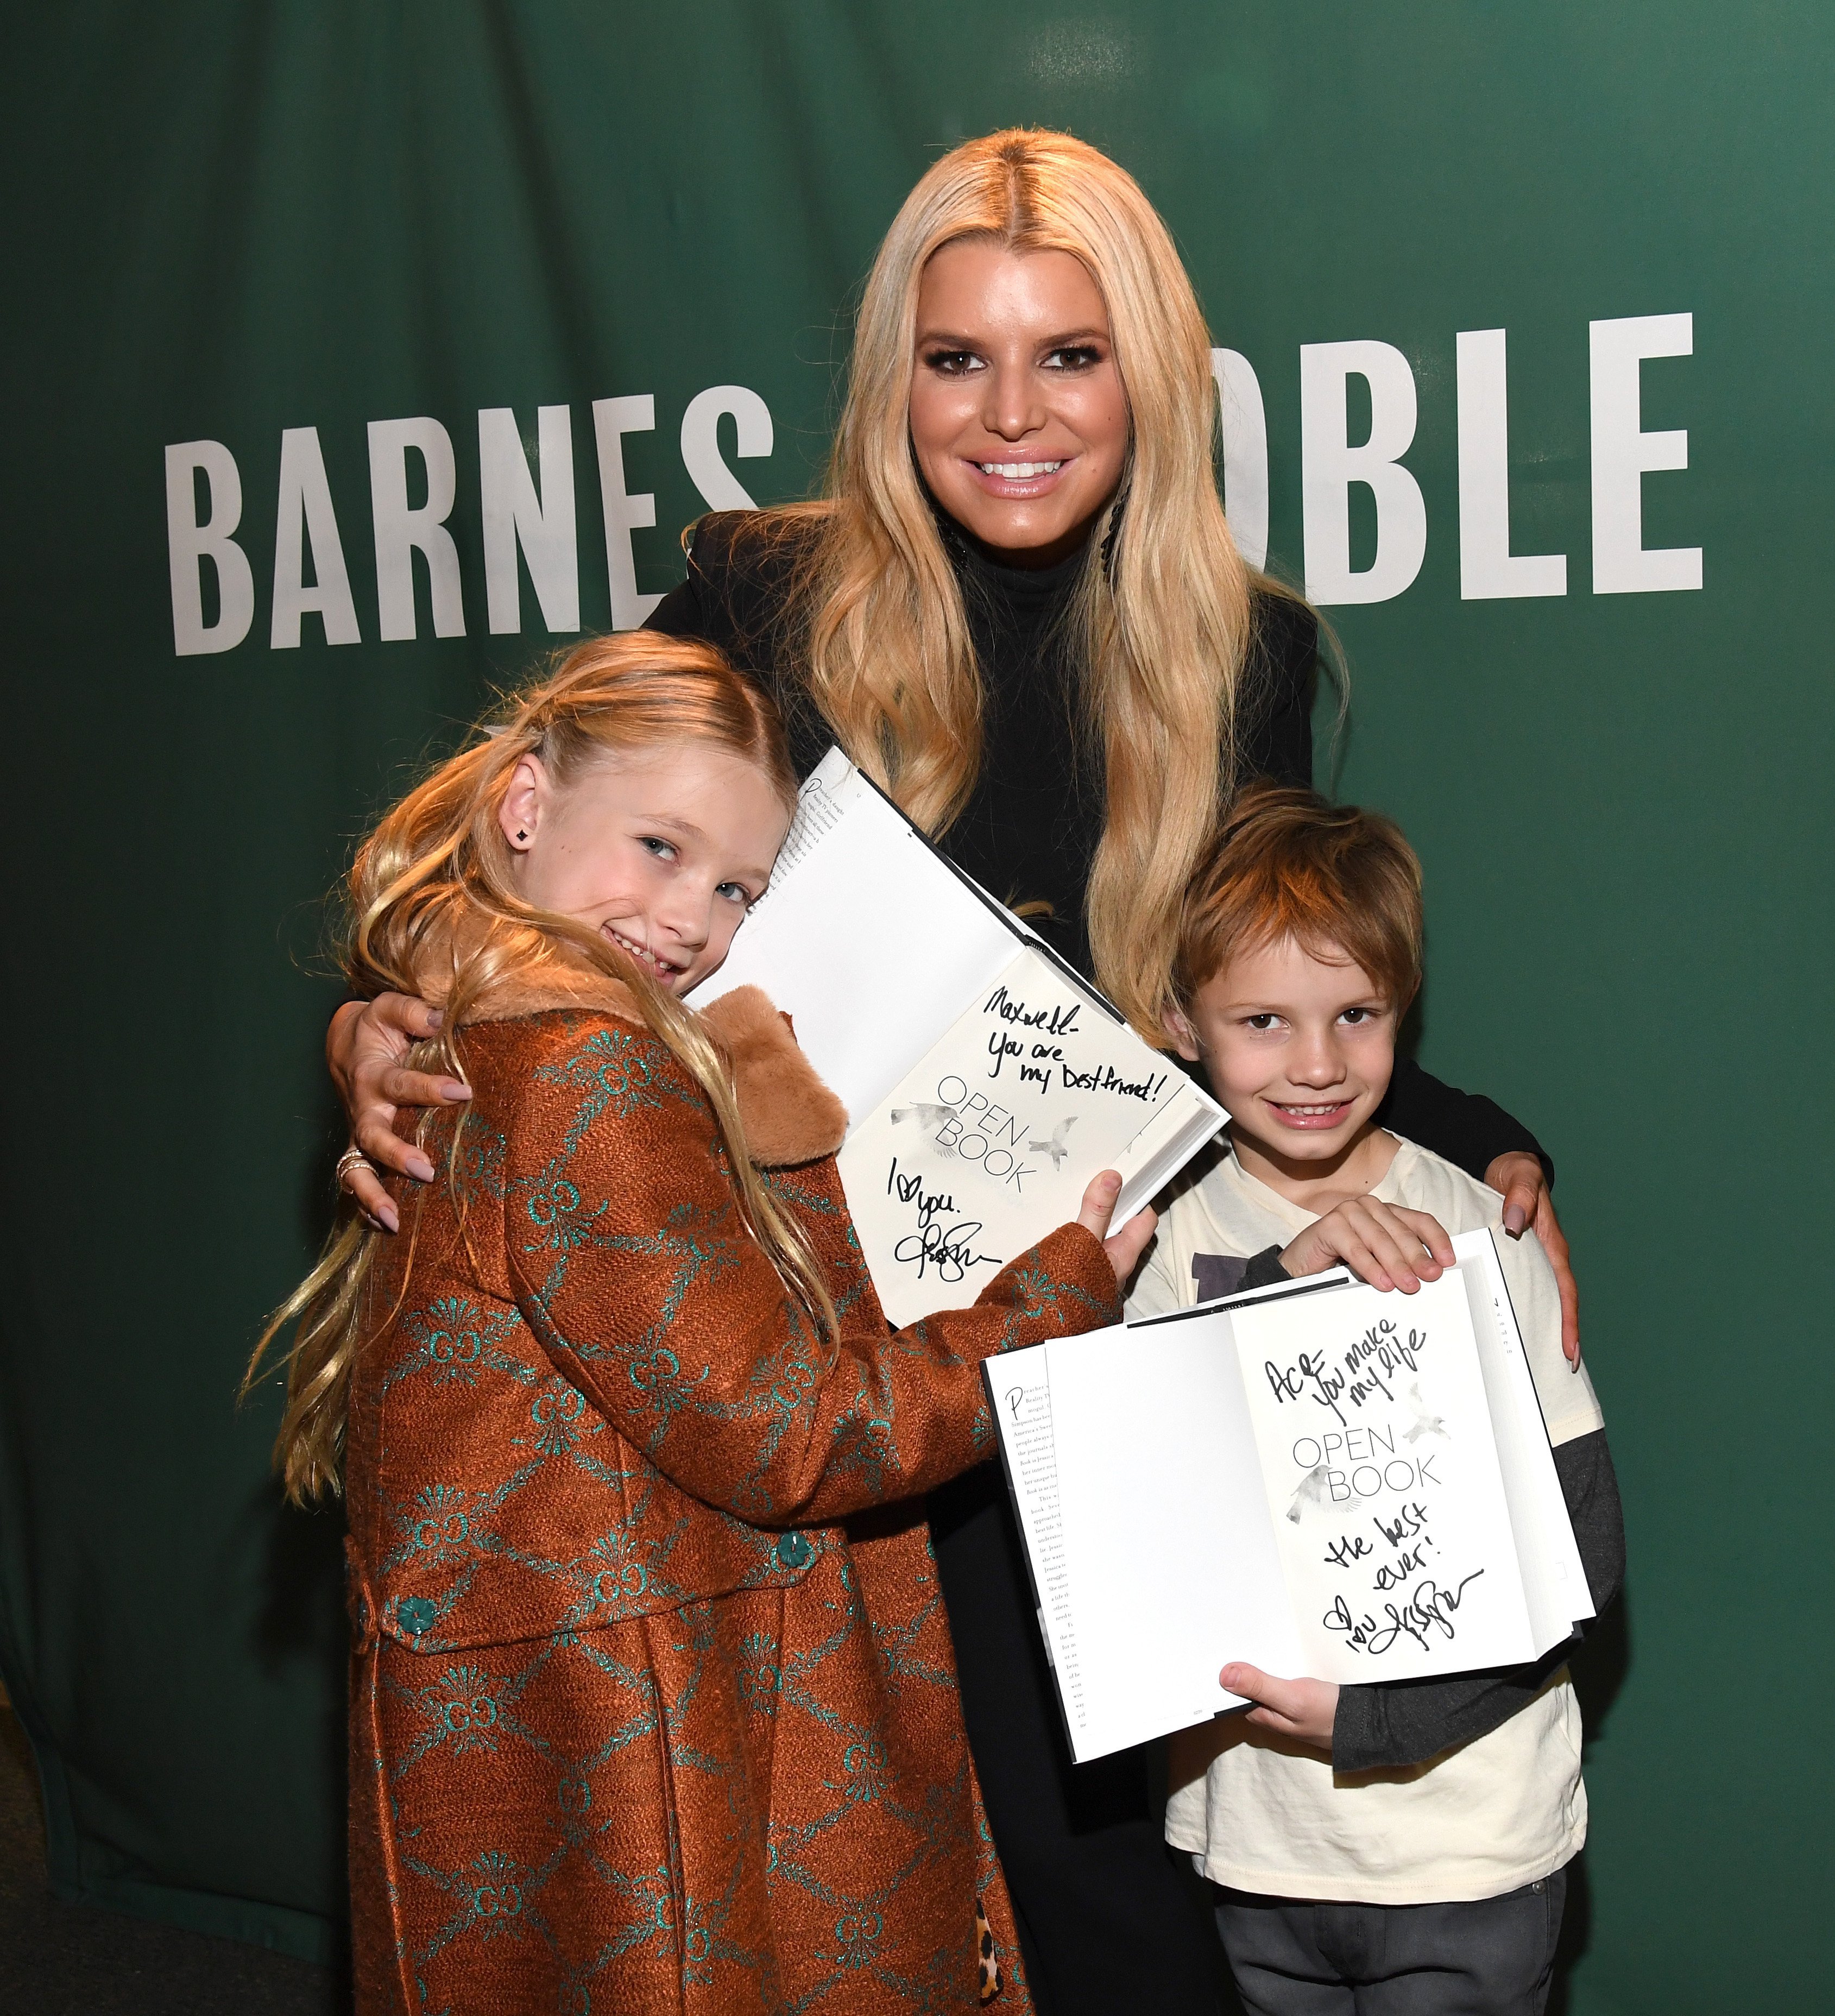 Jessica Simpson signs copies of her new book "Open Book" for her children Maxwell Drew Johnson and Ace Knute Johnson on February 04, 2020, in New York City. | Source: Getty Images.